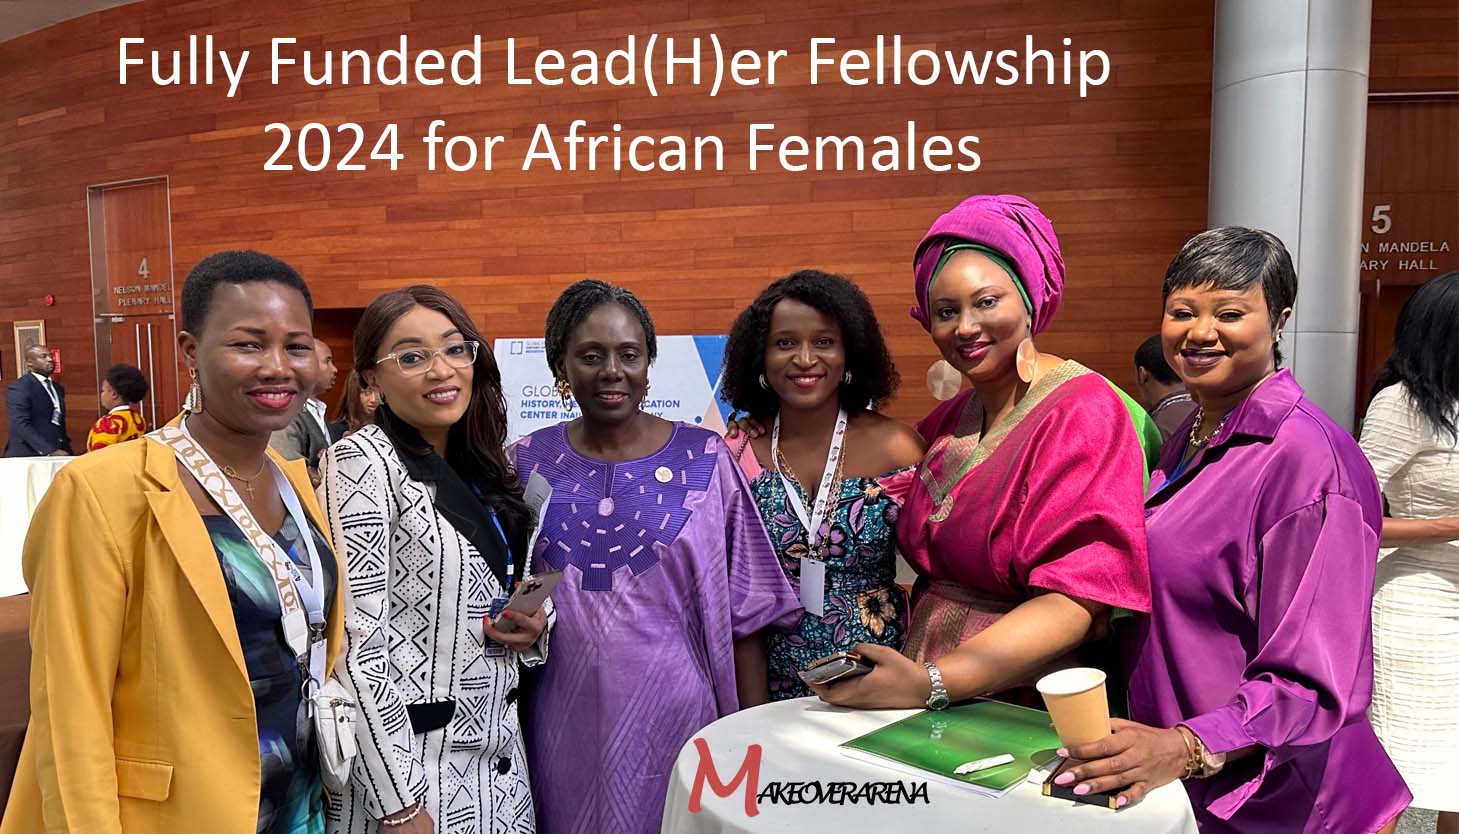 Fully Funded Lead(H)er Fellowship 2024 for African Females